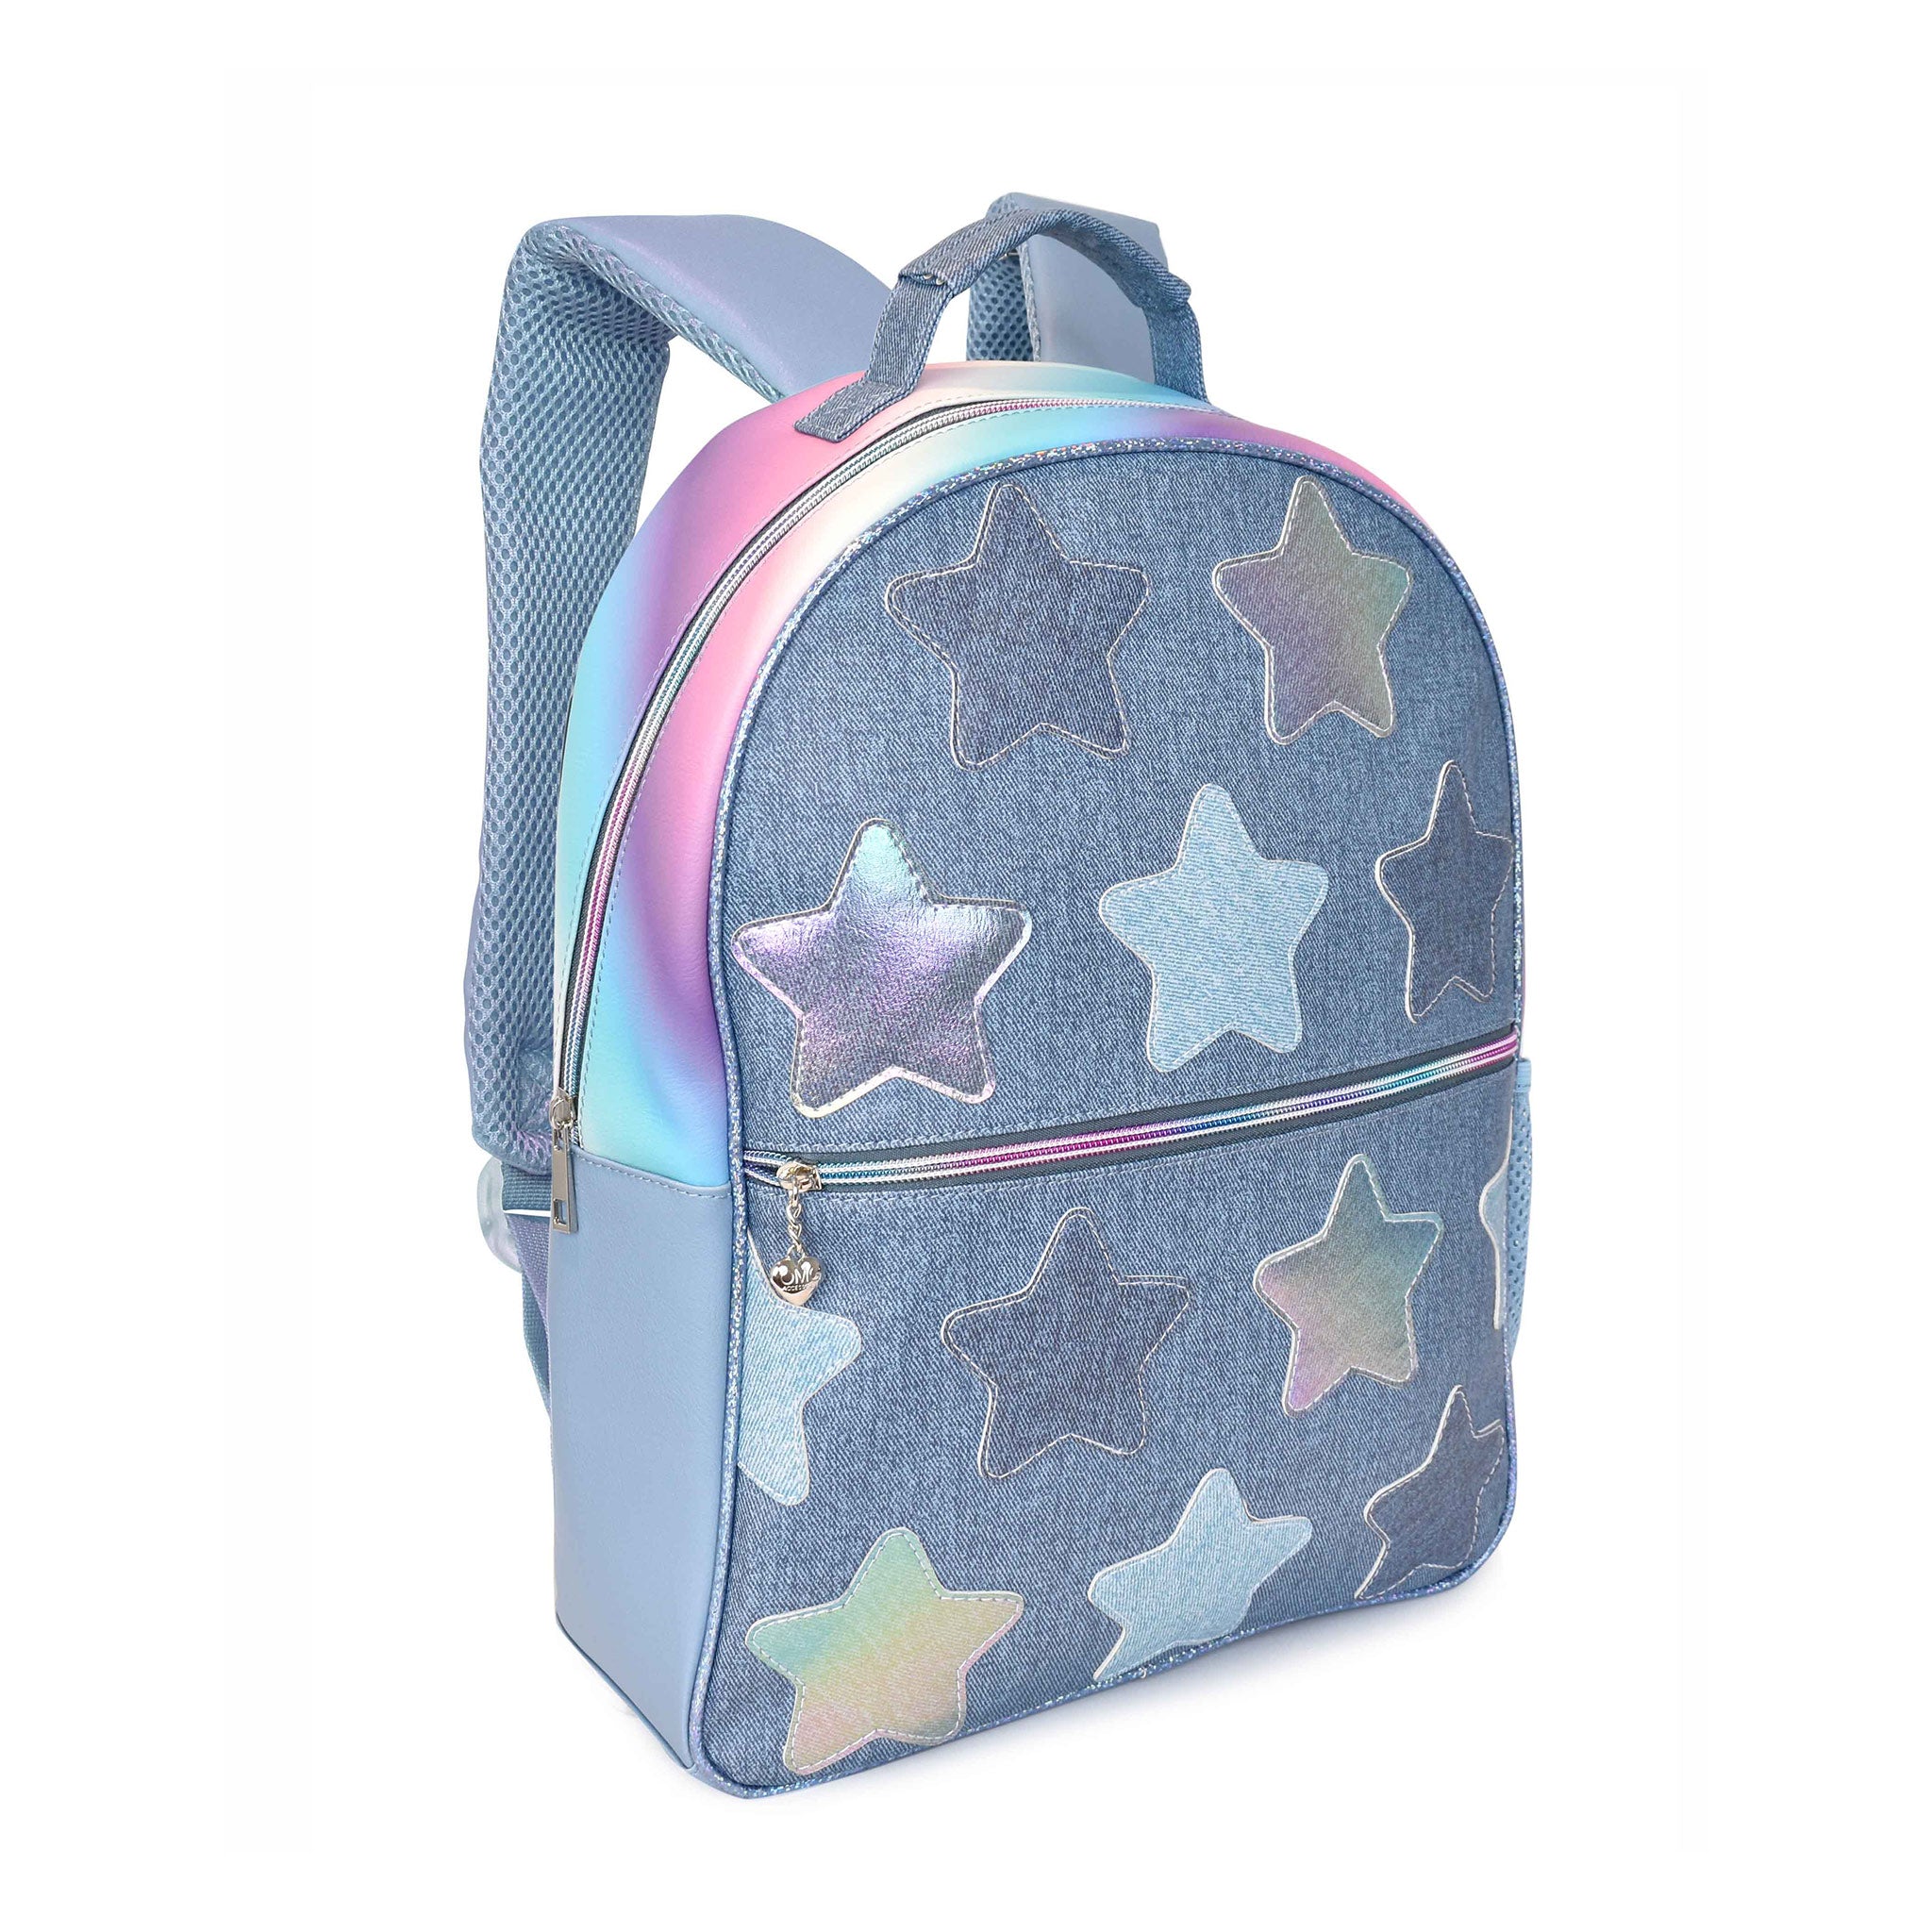 Side view of a denim large backpack with denim and metallic star patches